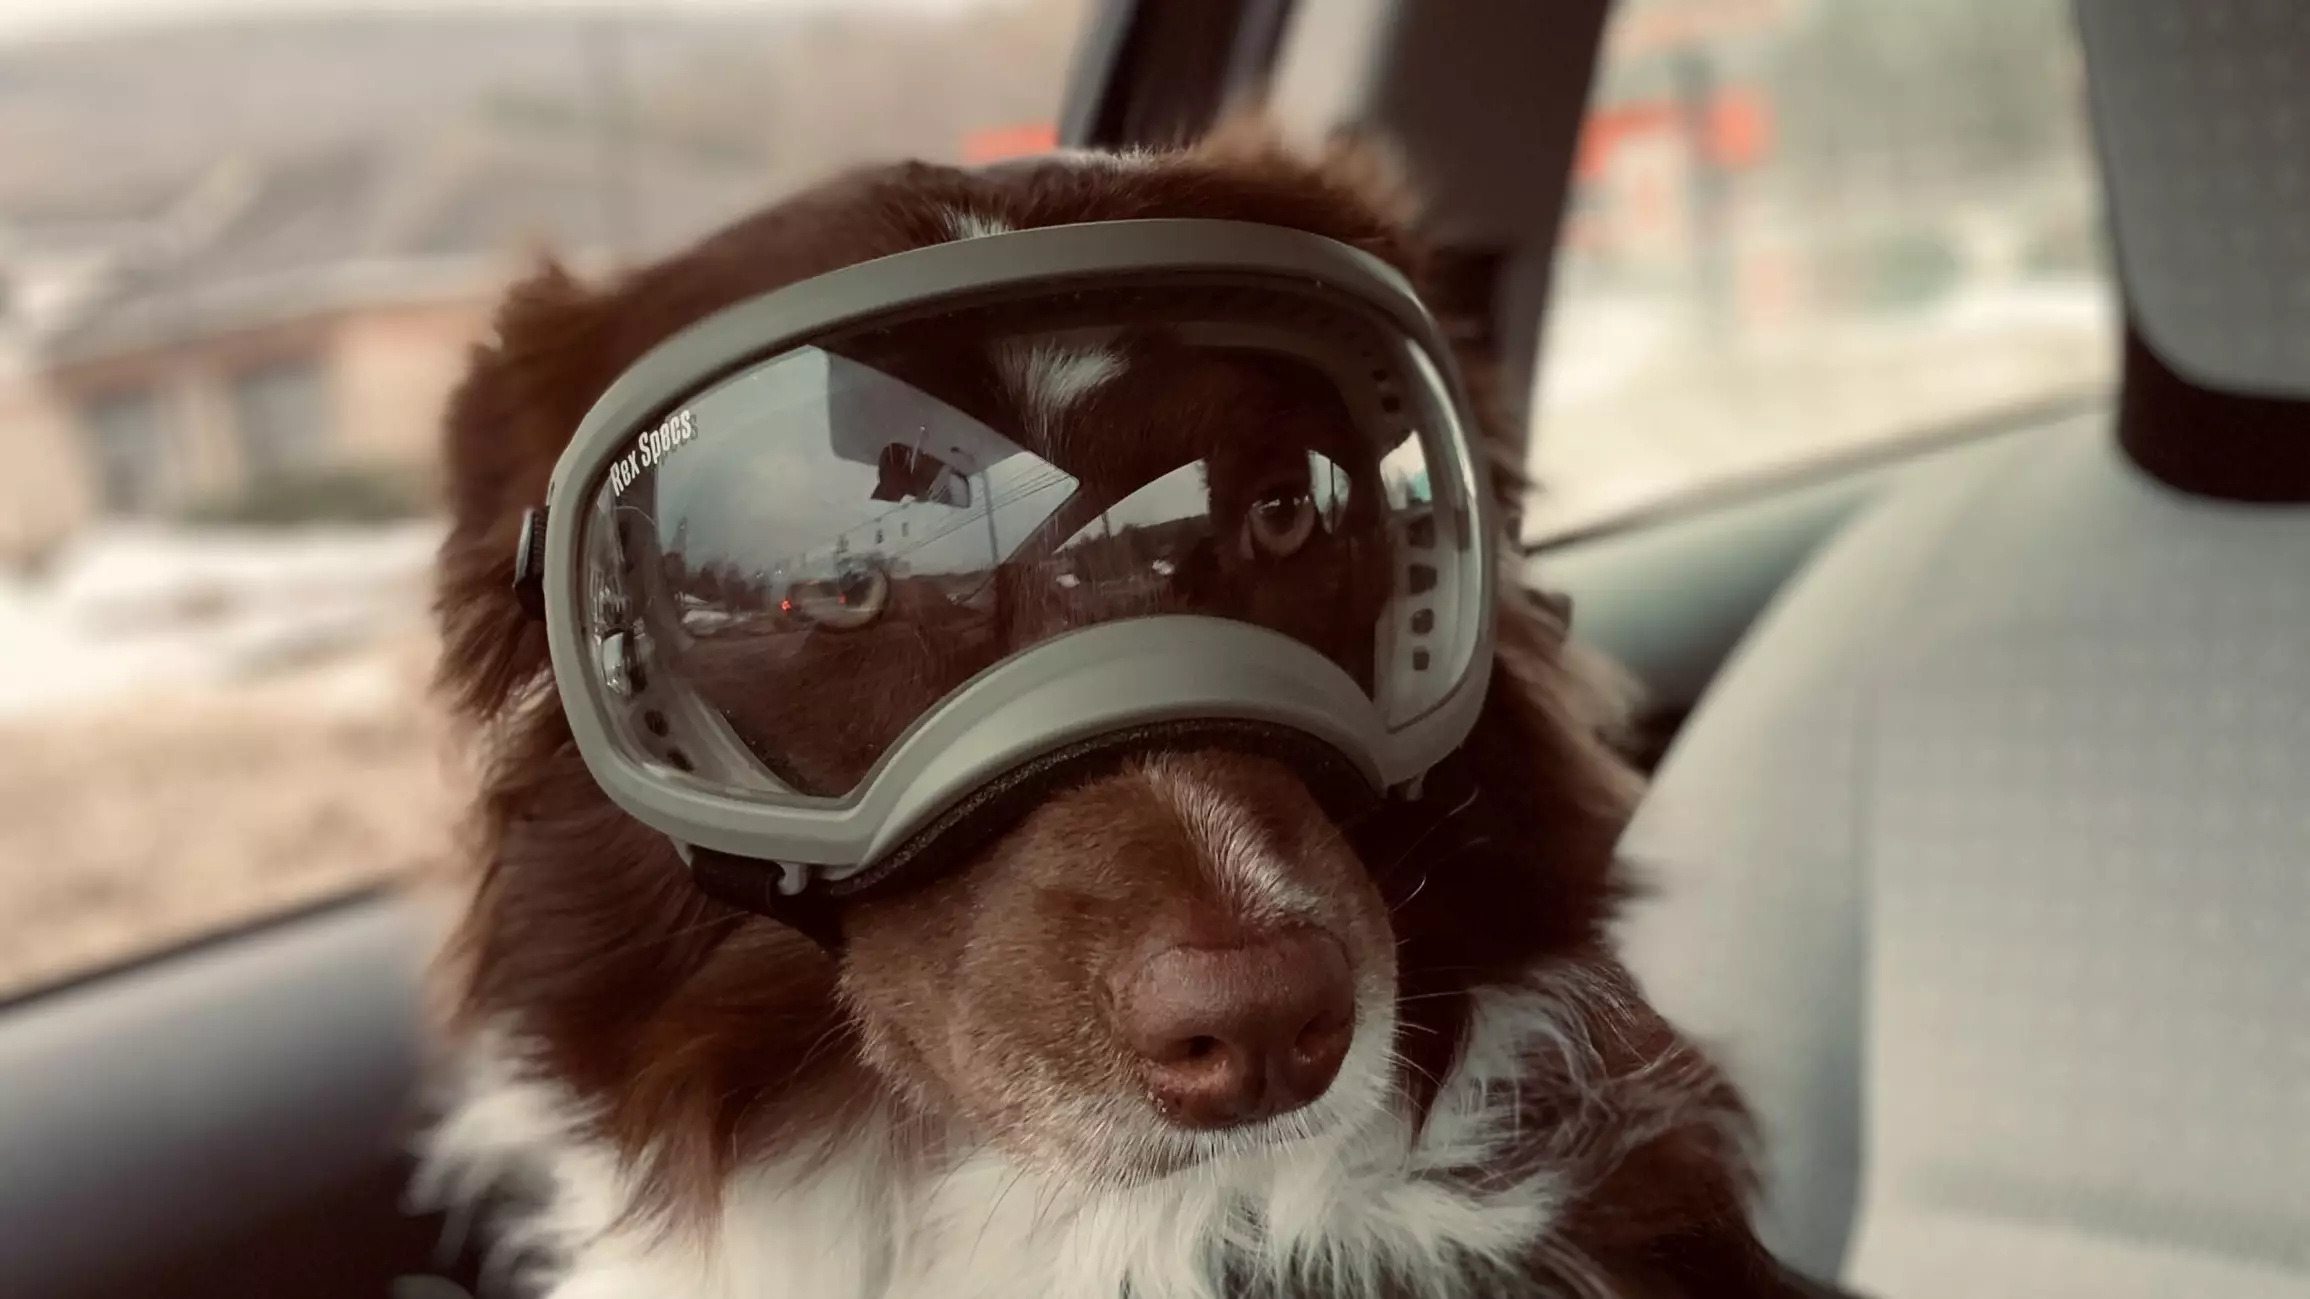 ​This Dog Has Special Goggles So She Can Play In The Snow